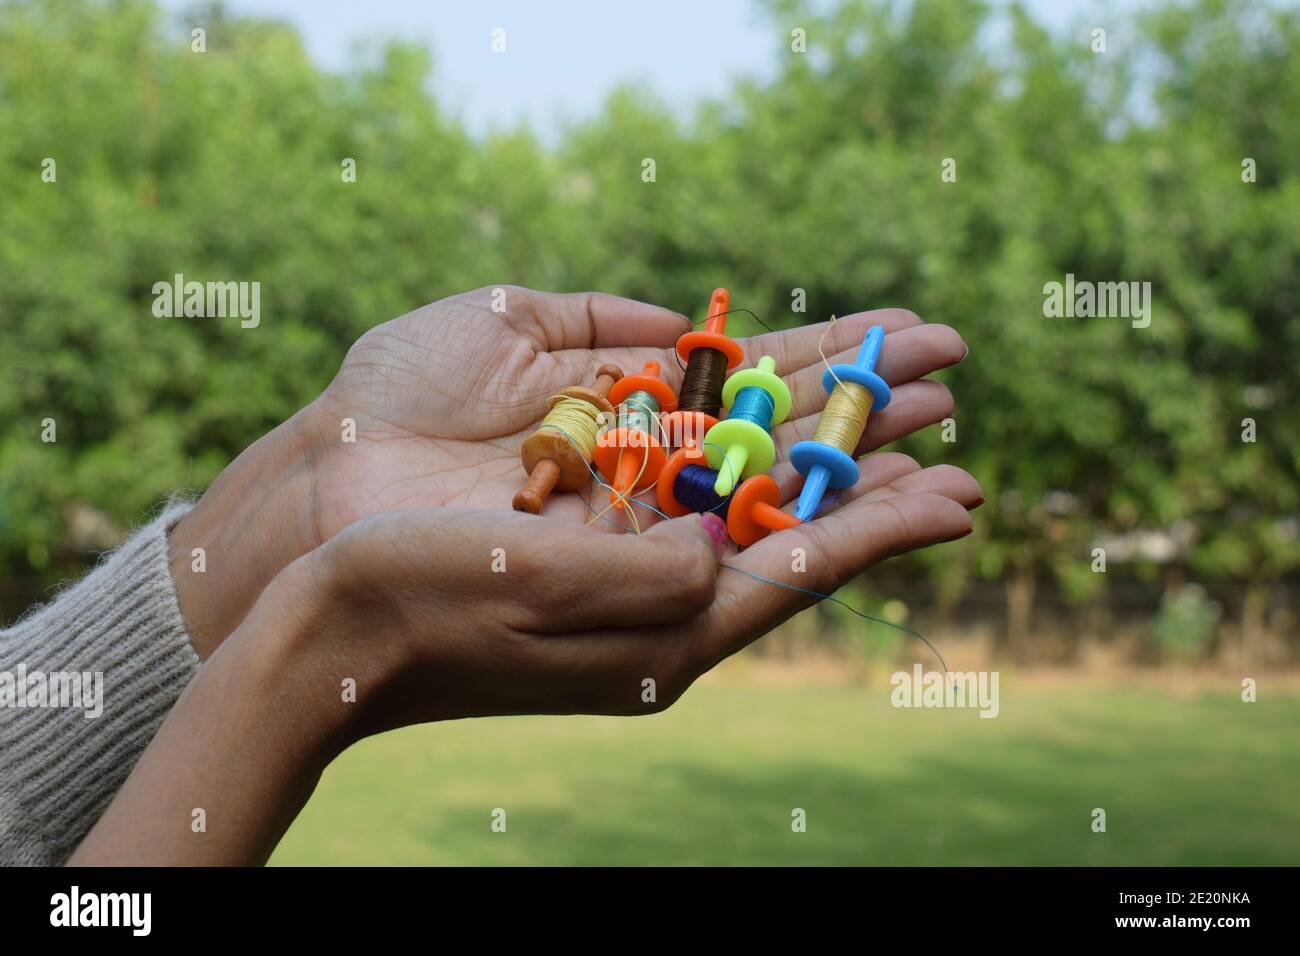 Collection of miniature spools, thread rolls called as Manjha or maanja in hand palms. Toy spools manja on the occasion of kite flying festival uttara Stock Photo